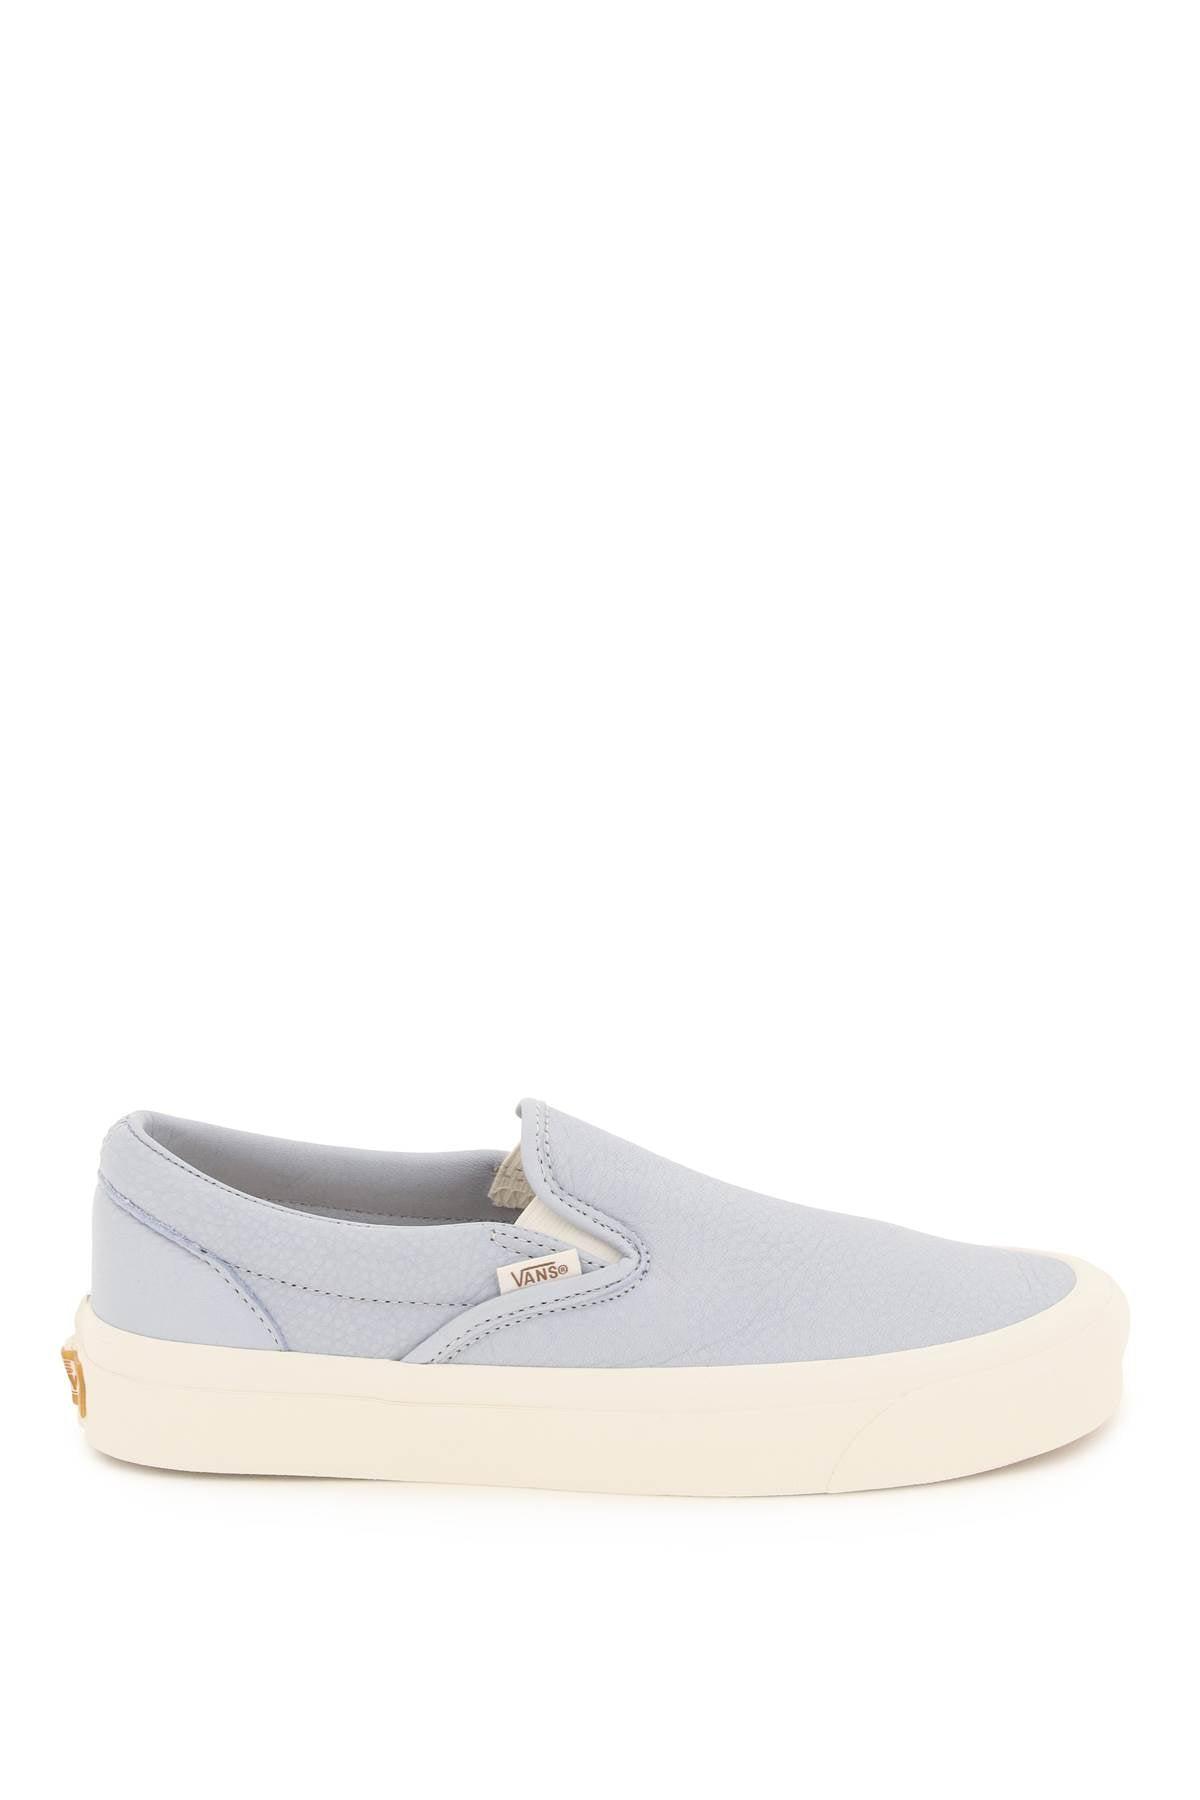 Vans Classic Slip-on Eco Theory Sneakers in White | Lyst